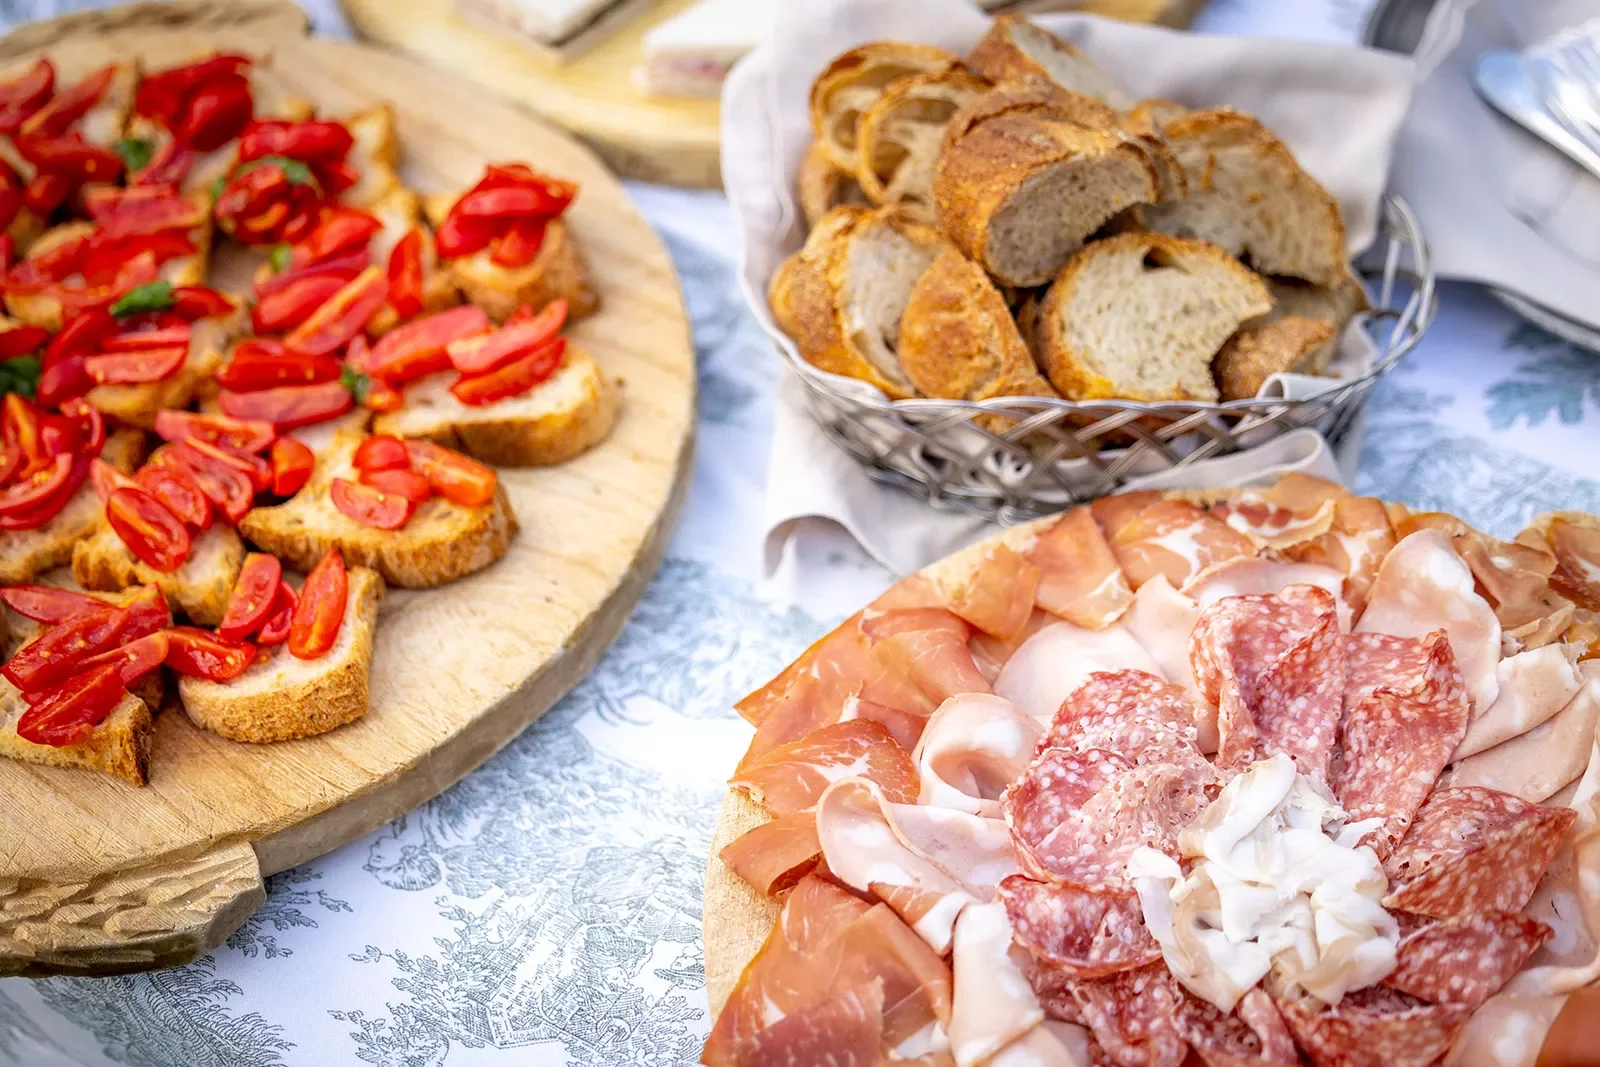 Platter of bread and tomatoes, cured meats, etc.